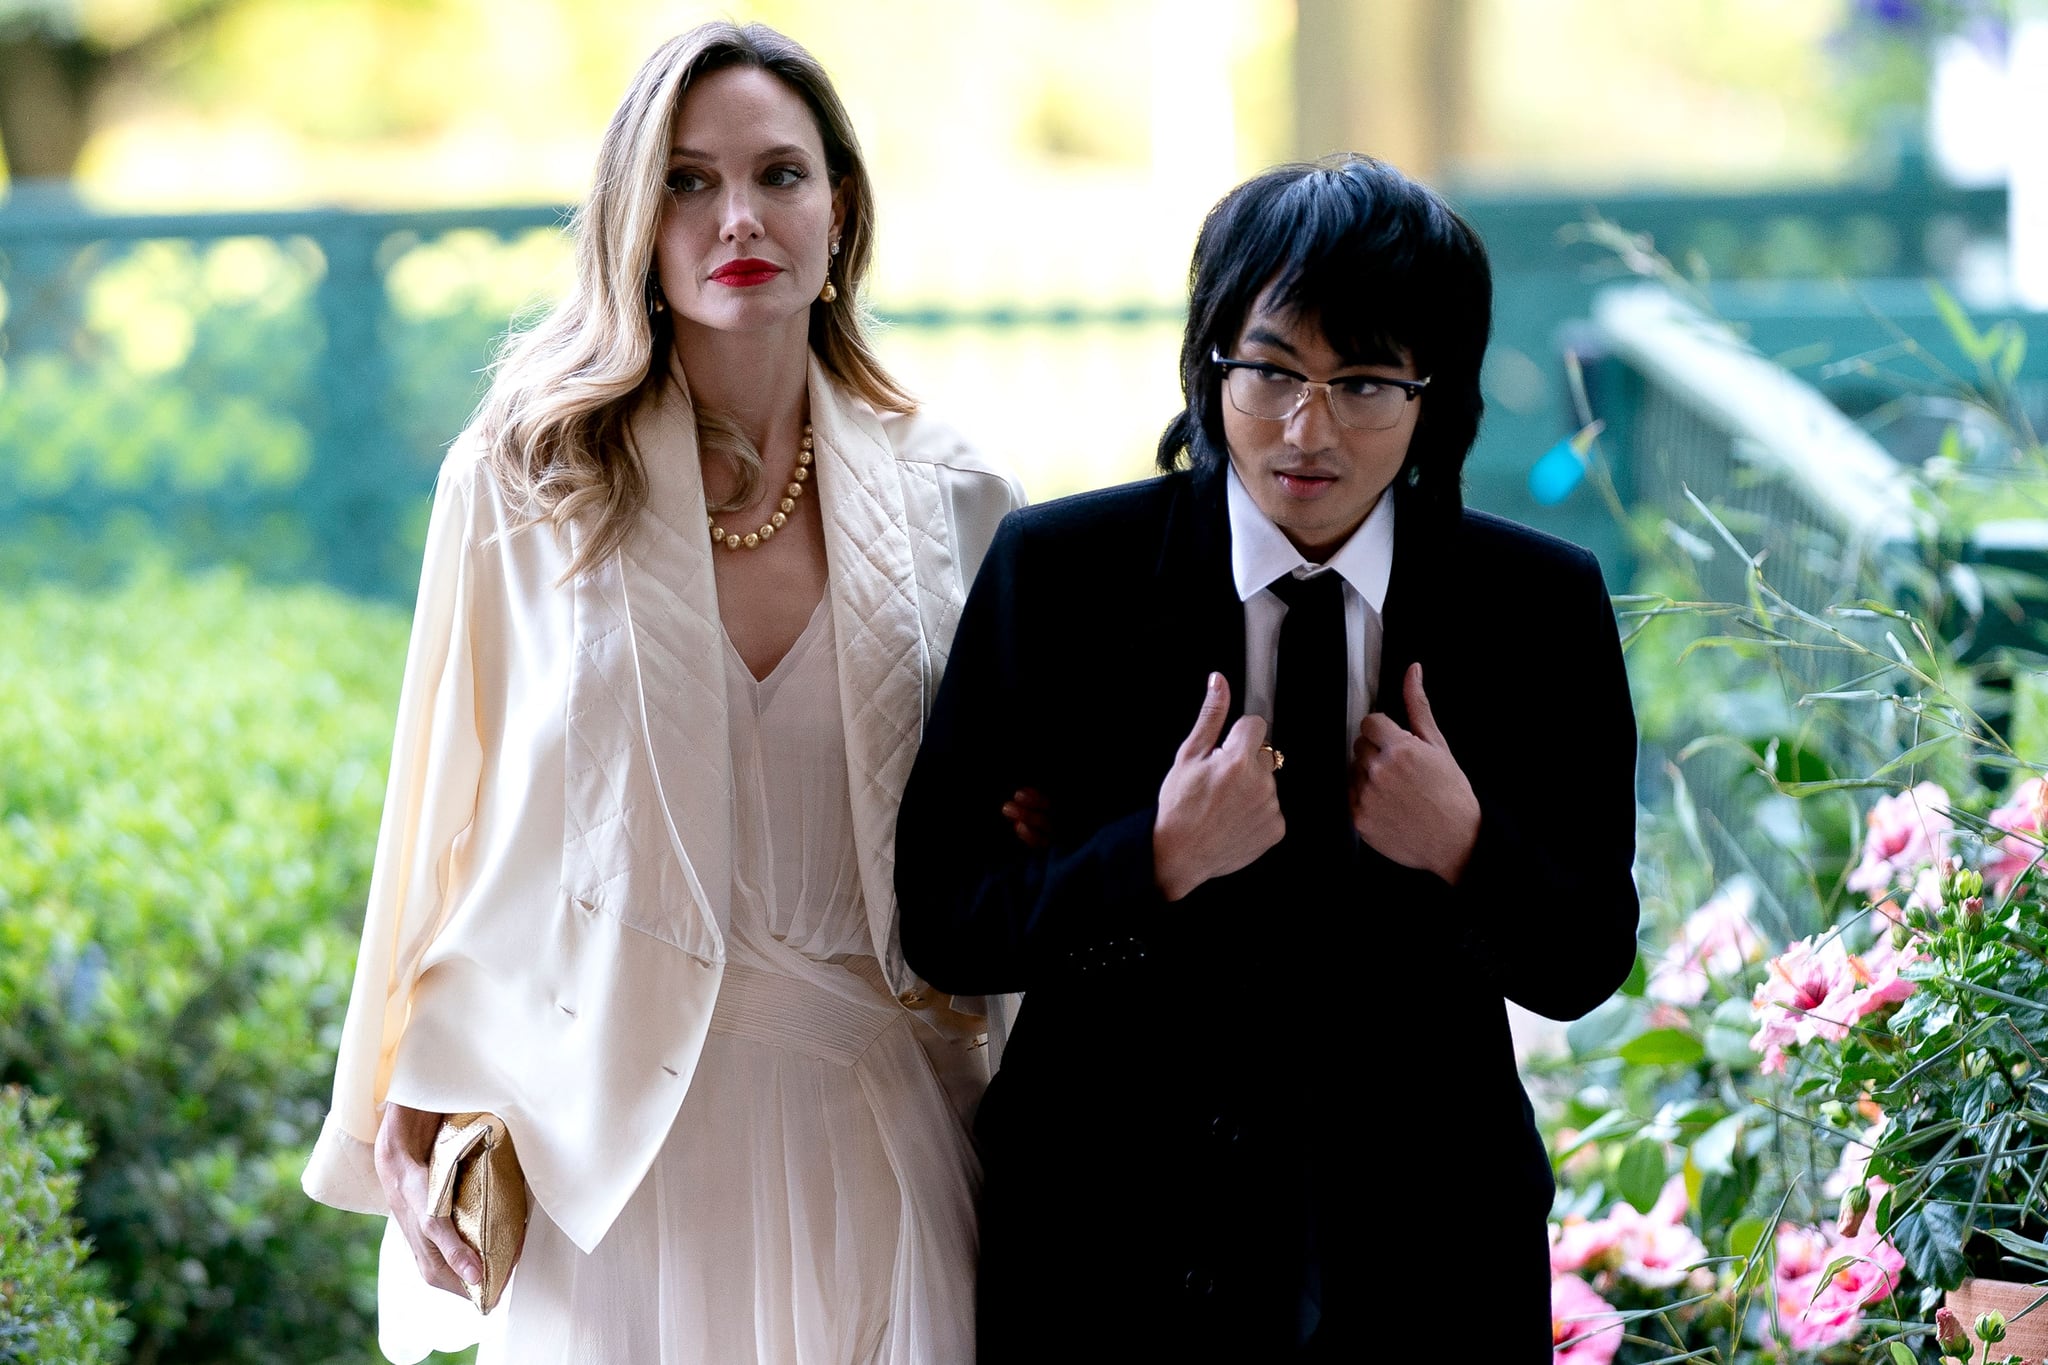 US actress Angelina Jolie (L) and her son Maddox arrive for a State Dinner US President Joe Biden and US First Lady Jill Biden host for South Korean President Yoon Suk Yeol and his wife Kim Keon Hee at the White House in Washington, DC, on April 26, 2023. (Photo by Stefani Reynolds / AFP) (Photo by STEFANI REYNOLDS/AFP via Getty Images)